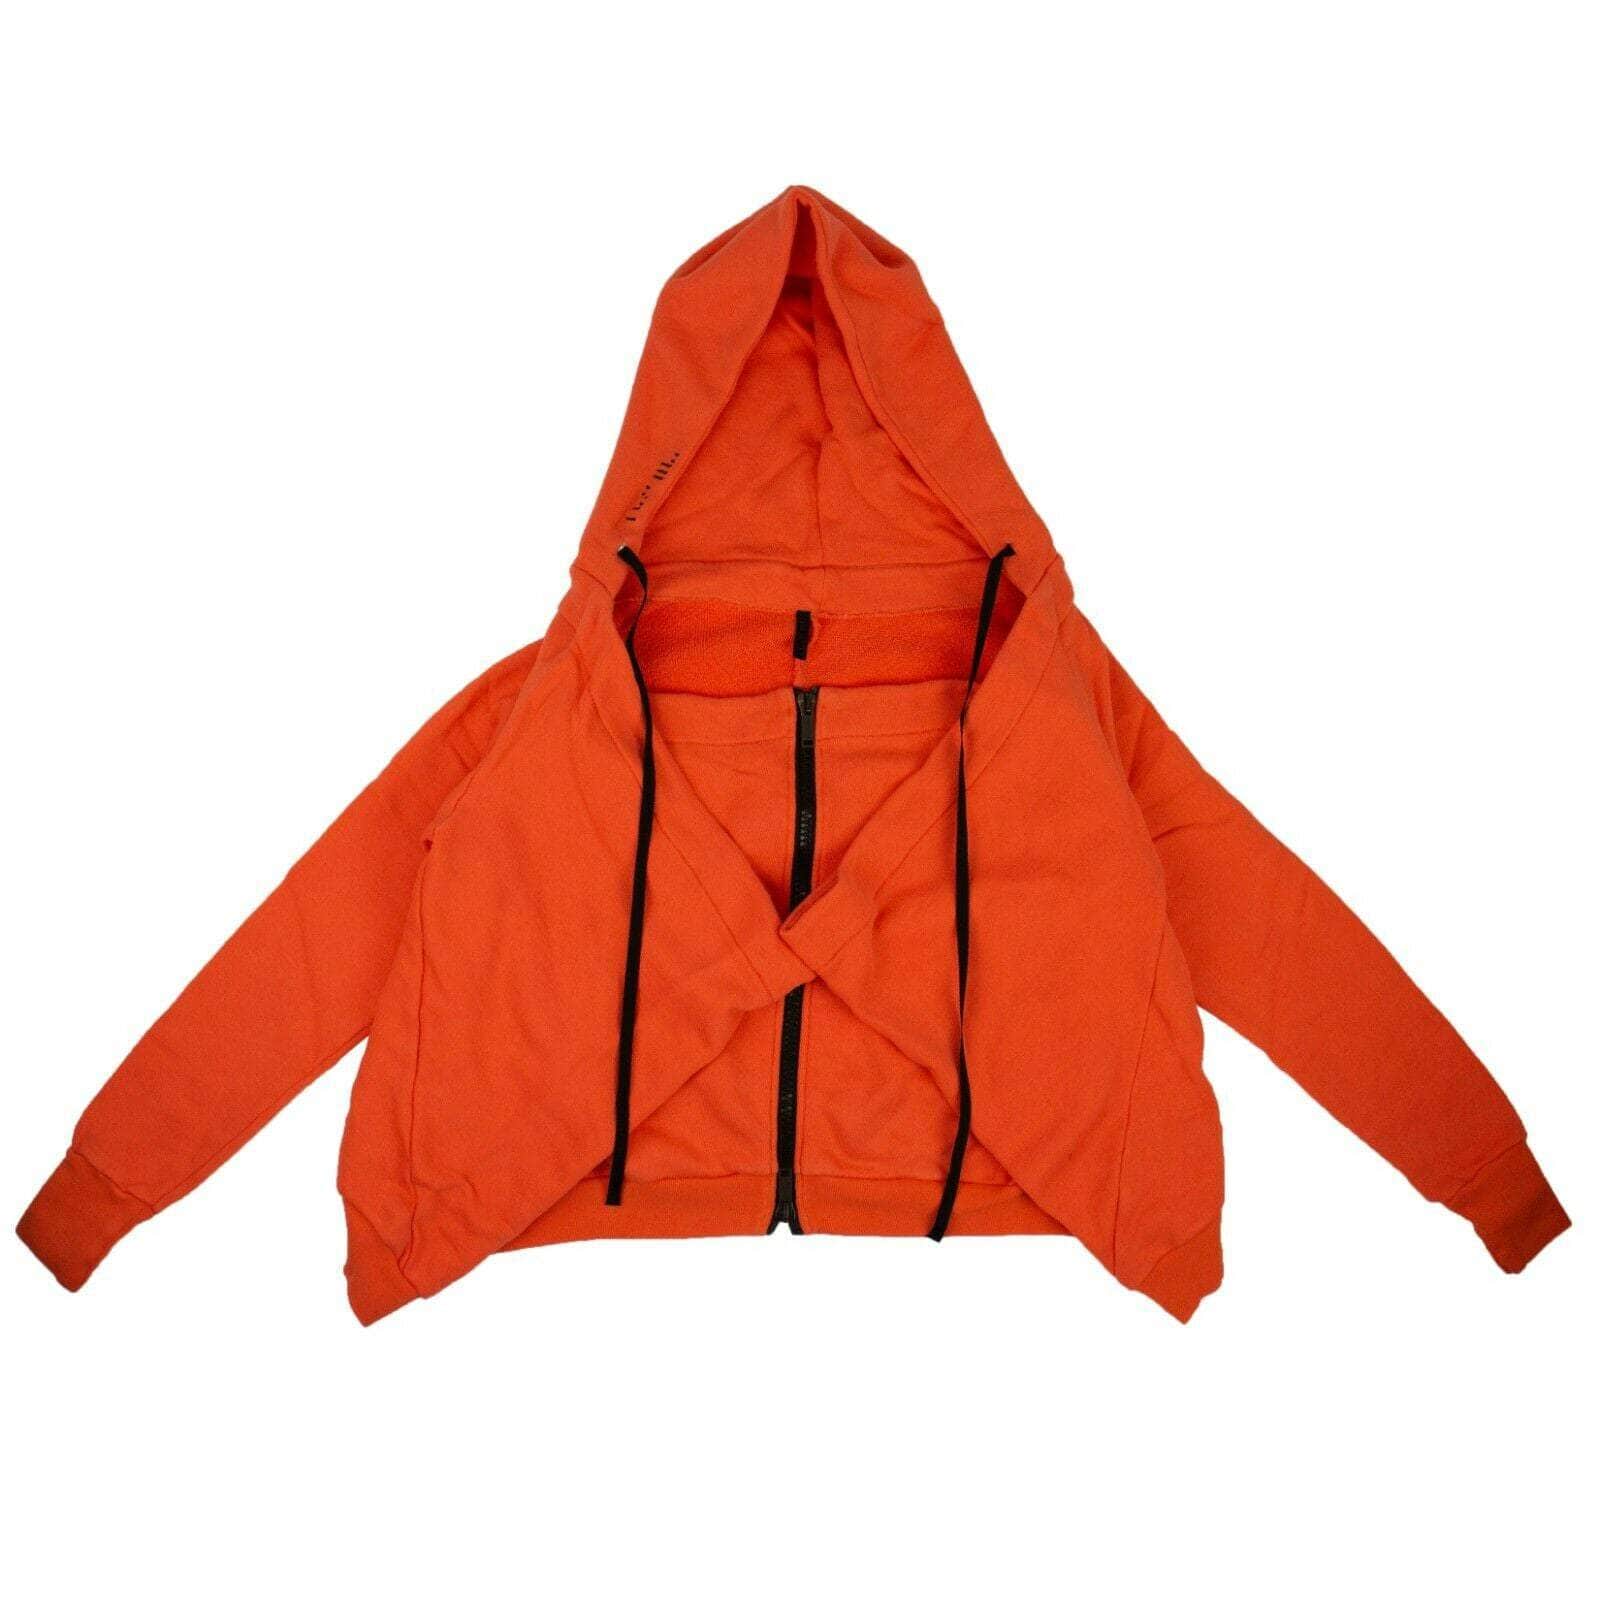 Unravel Project channelenable-all, chicmi, couponcollection, gender-womens, main-clothing, main-outerwear, size-s, size-xs, under-250, unravel-project, womens-capes-ponchos XS / UWBC005S191740076400 Orange Cotton 'Tie Front' Jacket 74NGG-UN-15/XS 74NGG-UN-15/XS